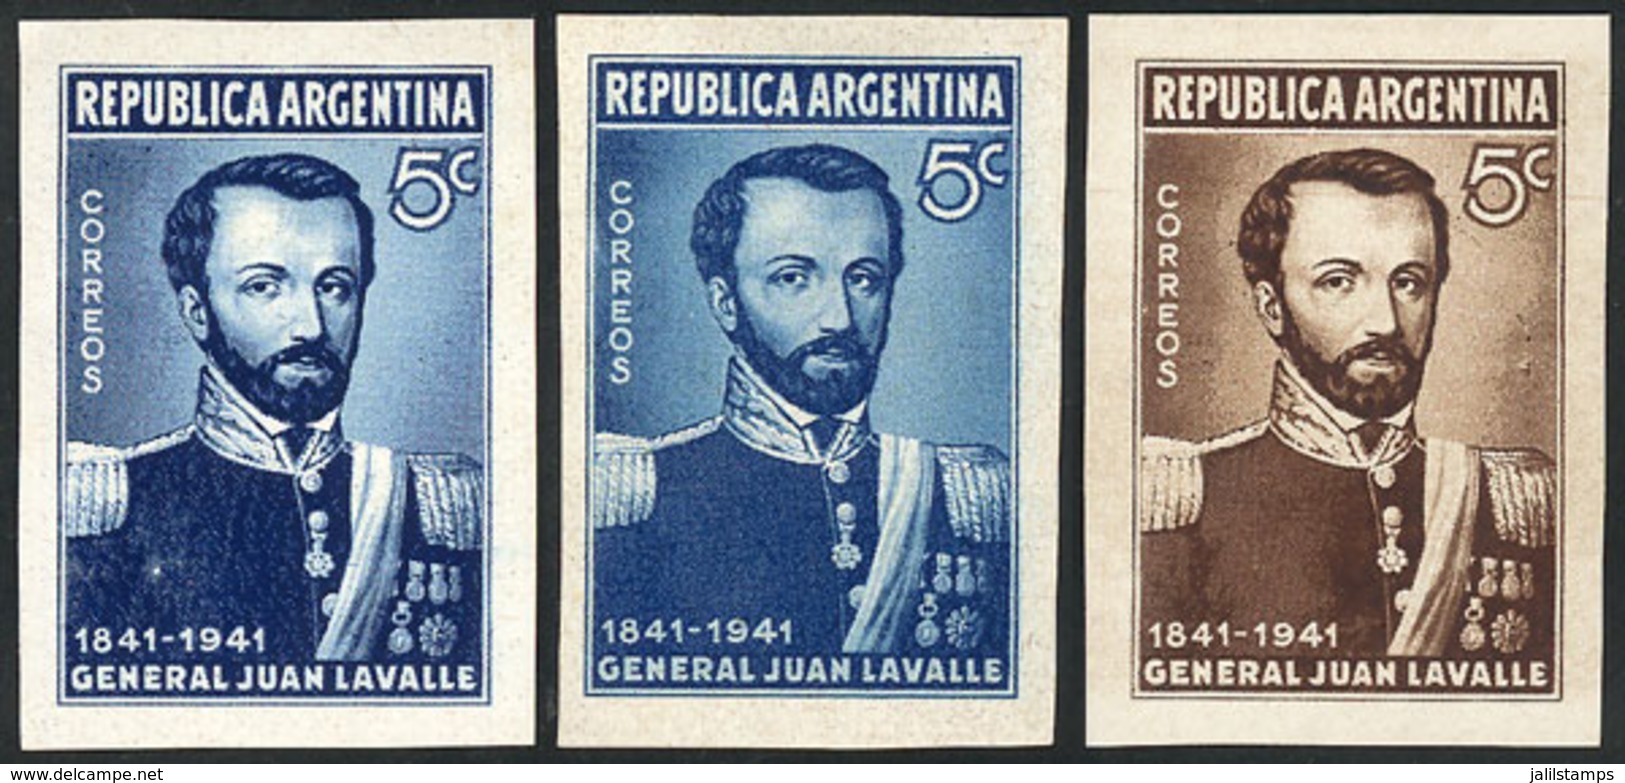 ARGENTINA: GJ.854, 1941 General Juan Lavalle, 3 PROOFS In Different Colors, VF Quality! - Unused Stamps